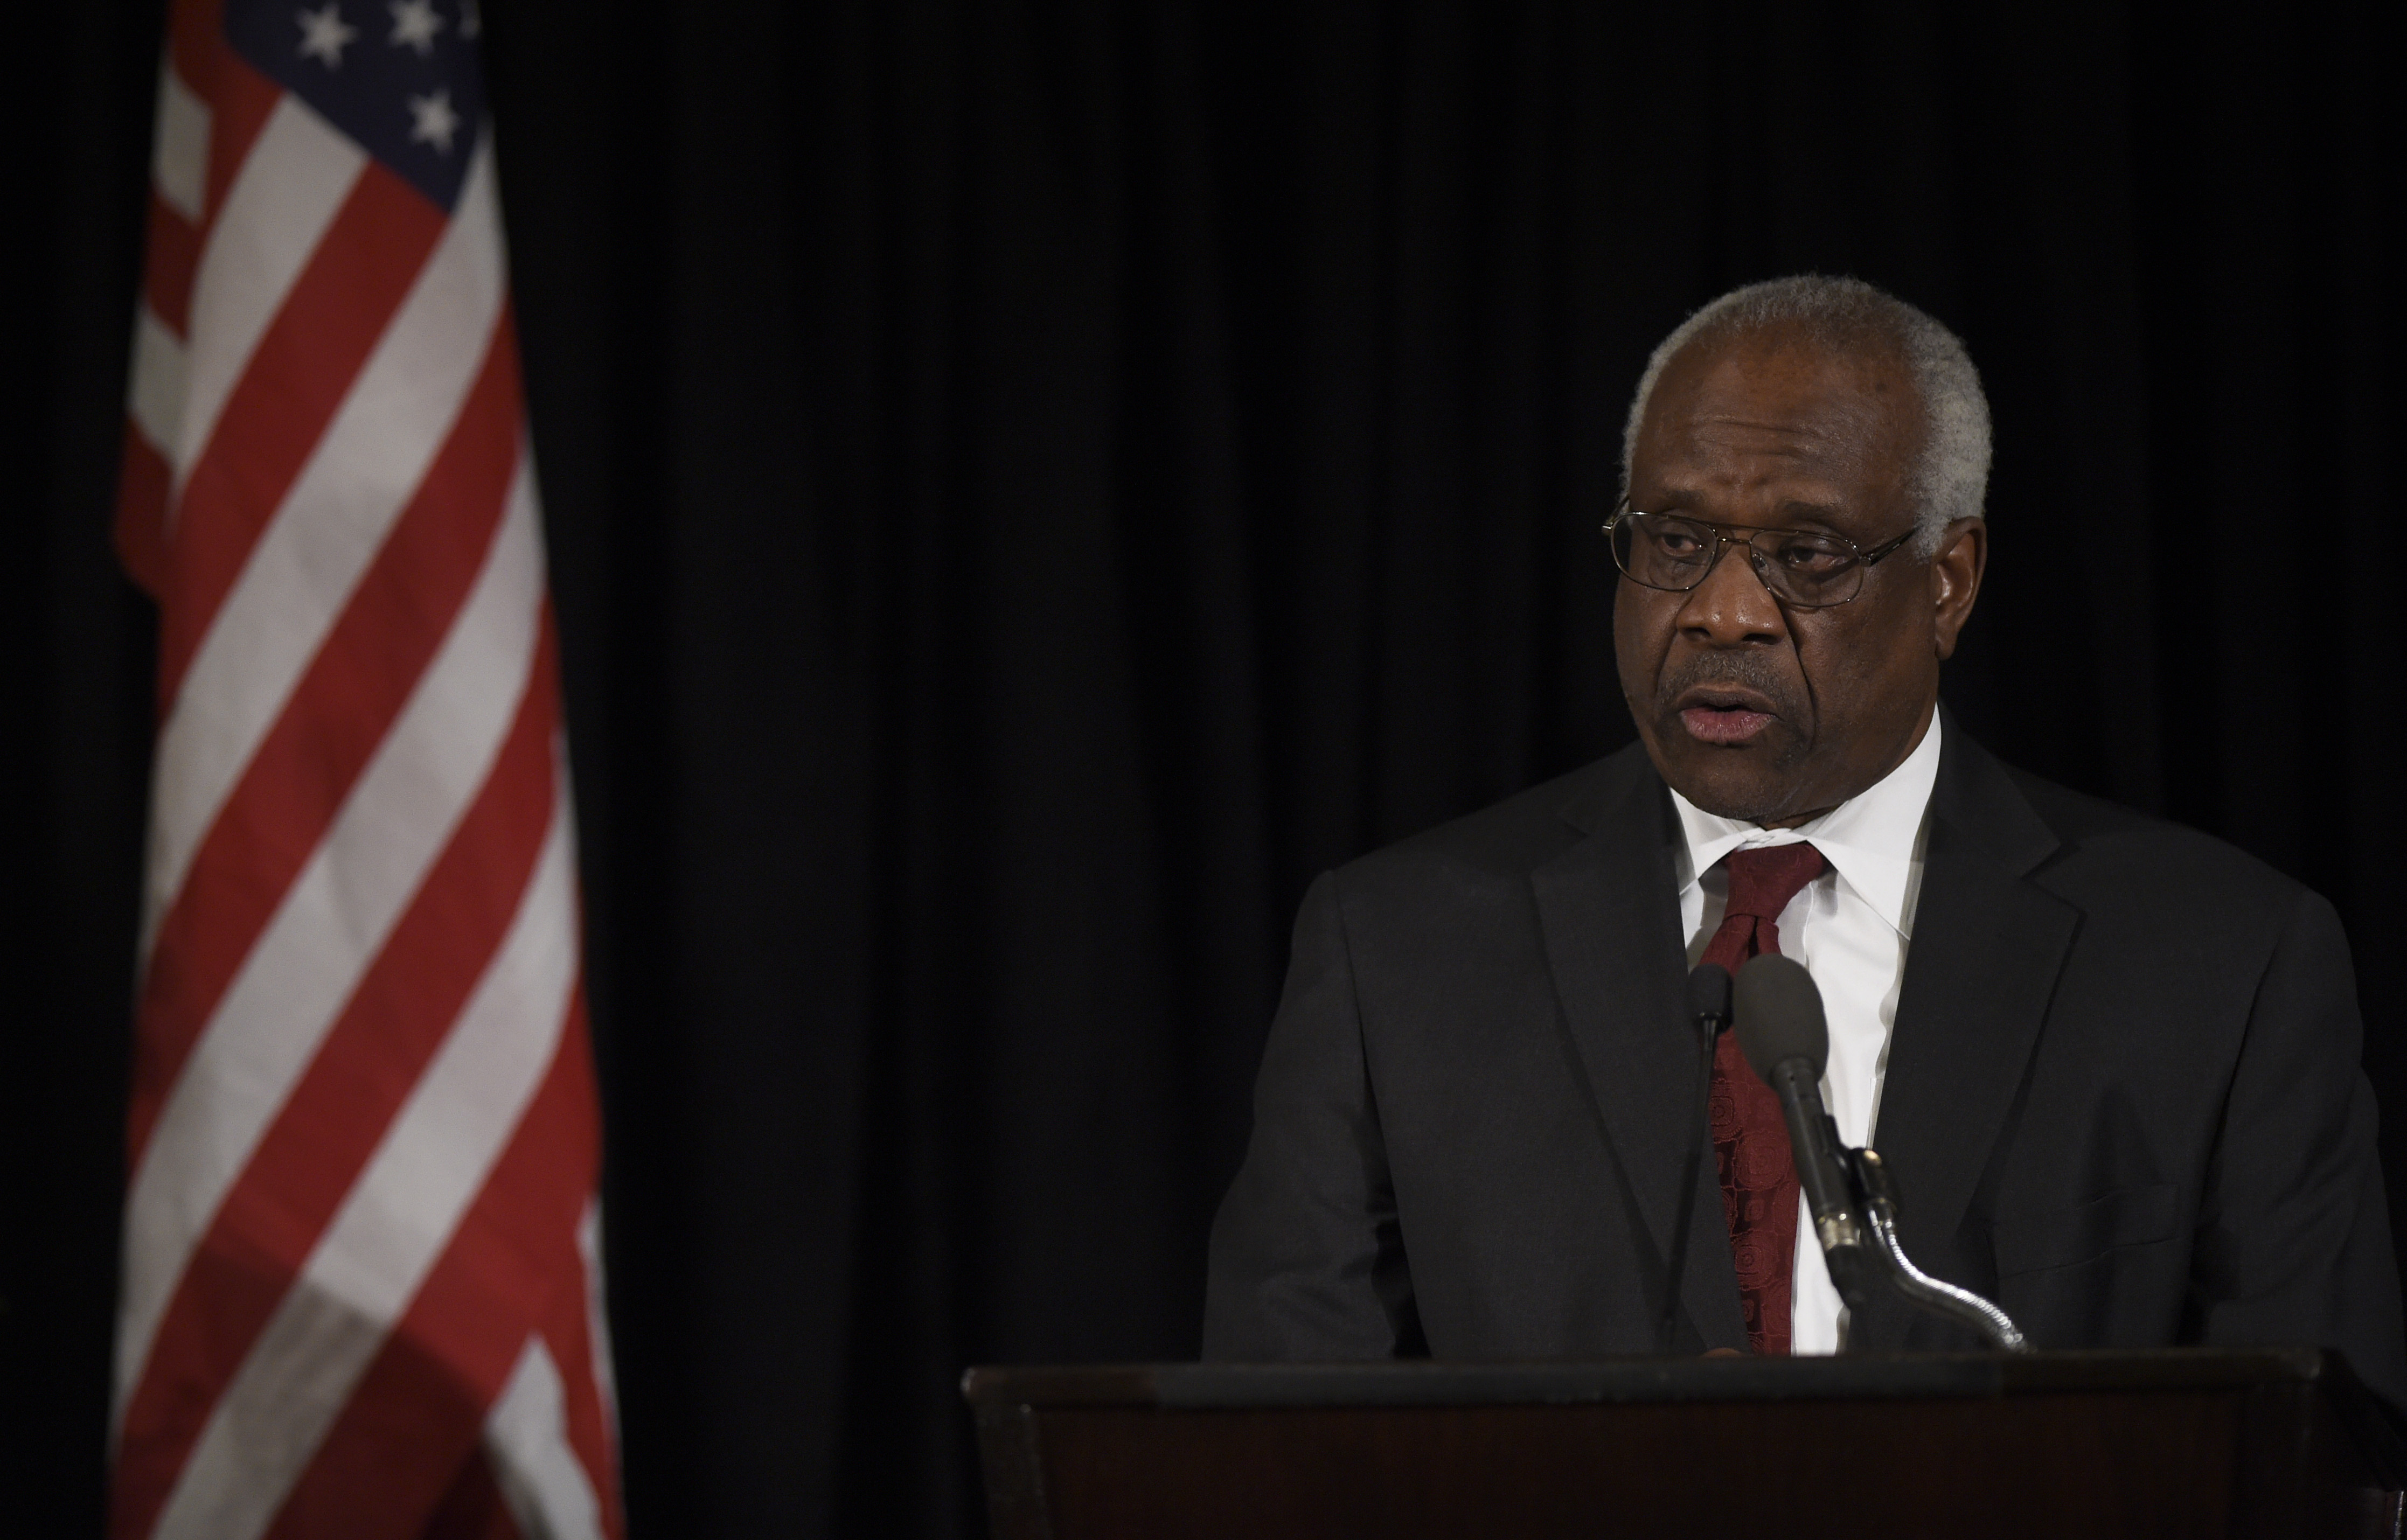 It was just awful': The Clarence Thomas hearings, in the words of those who  were there - The Washington Post